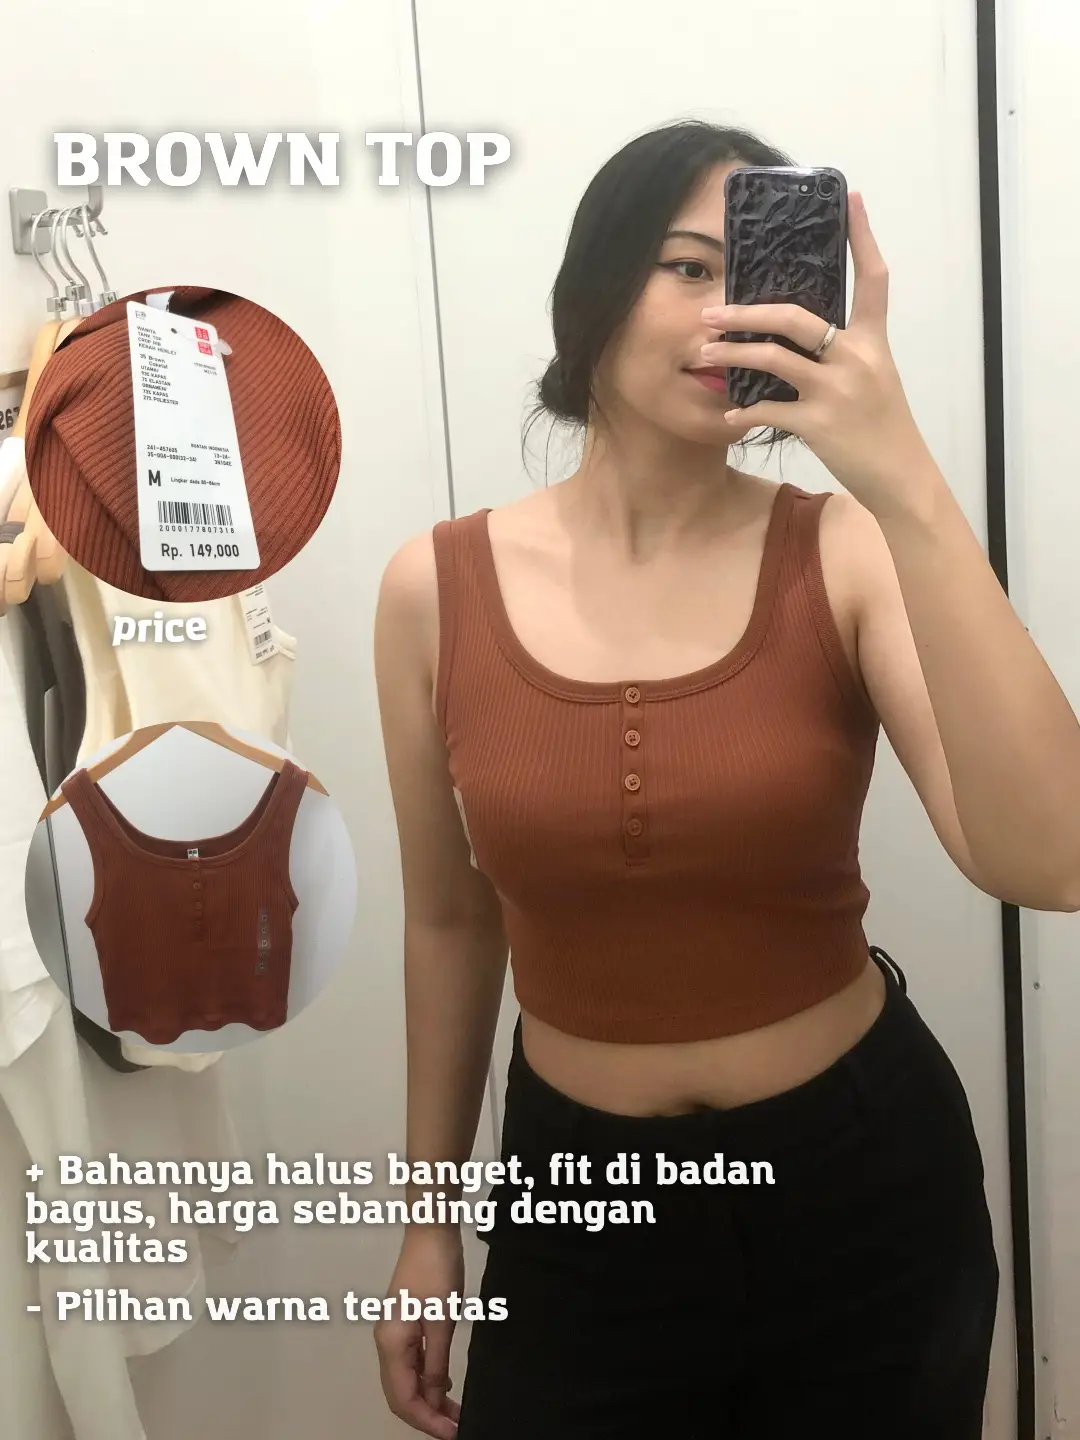 Must buy from Uniqlo! Body shaper from Uniqlo!